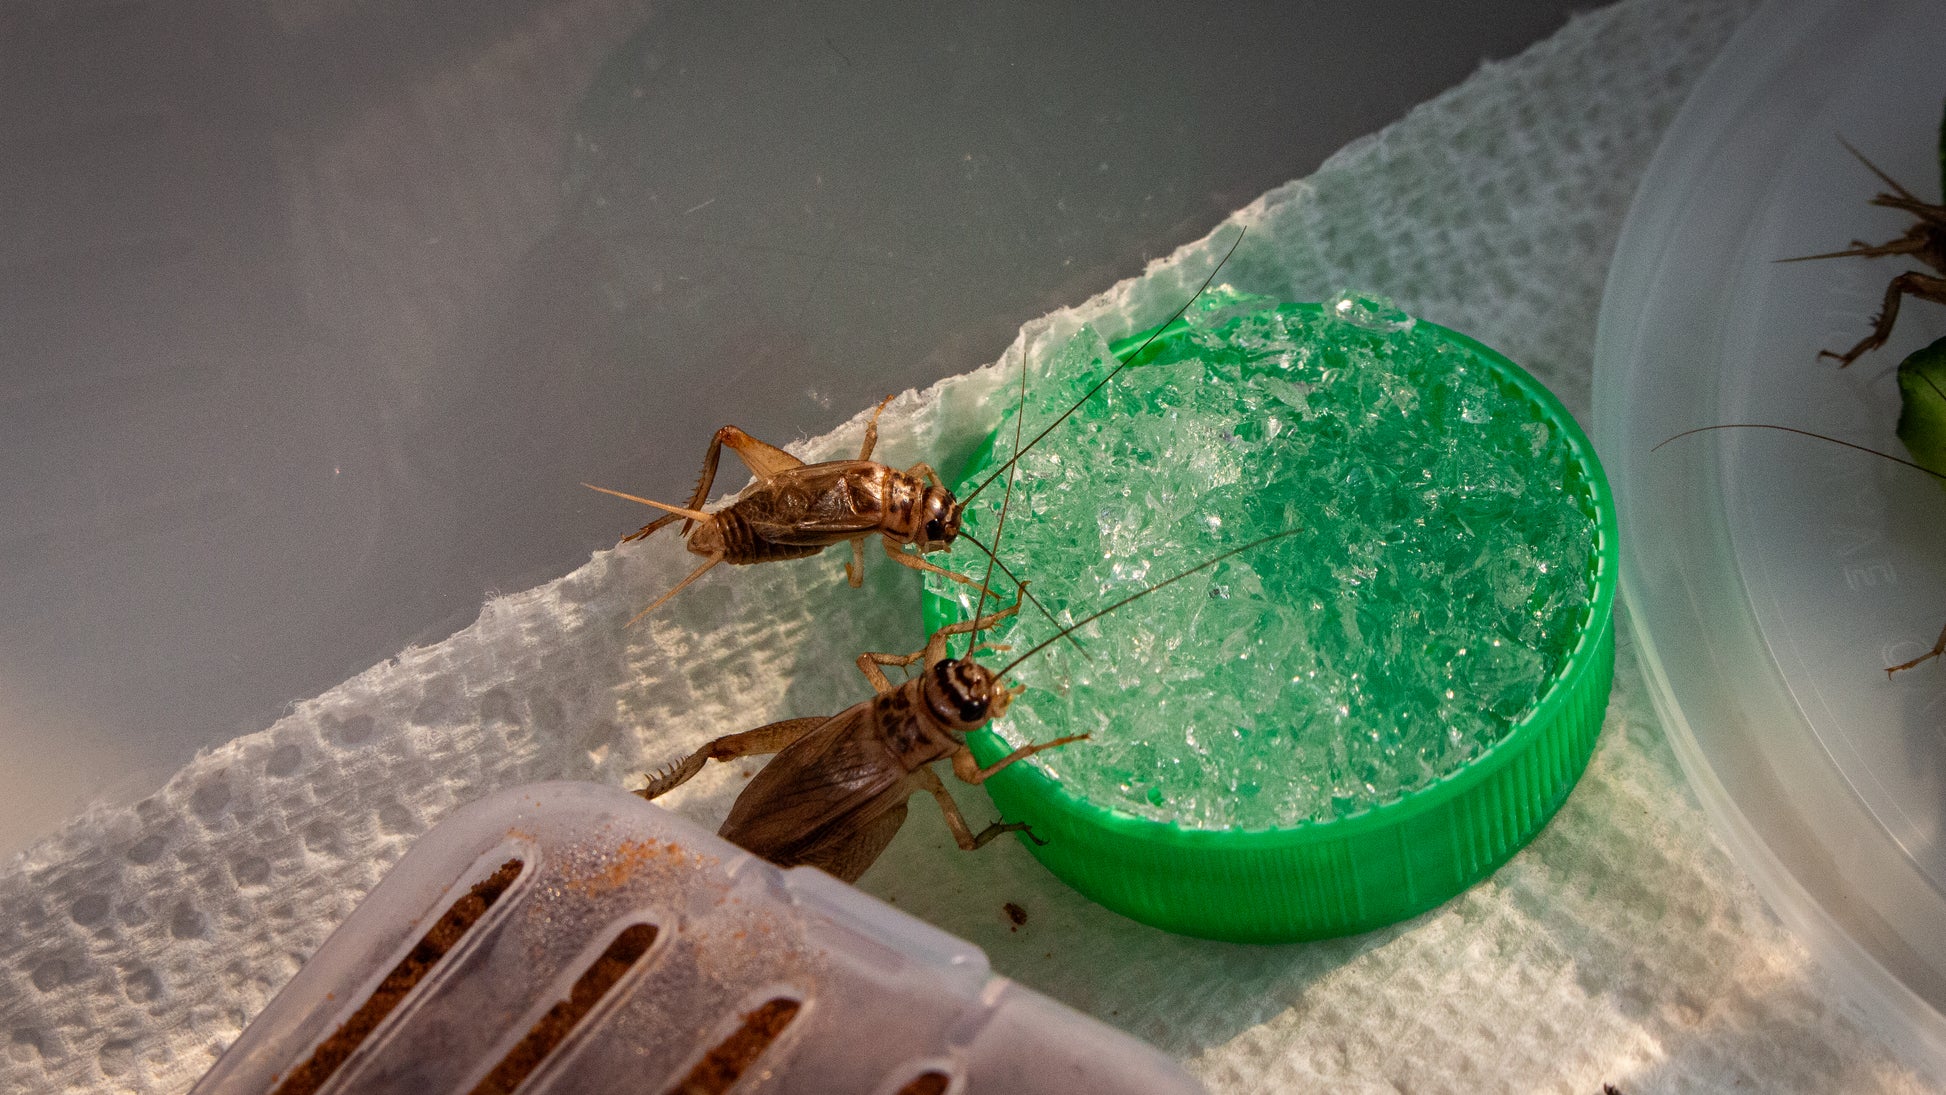 Crickets drinking from container of water crystals